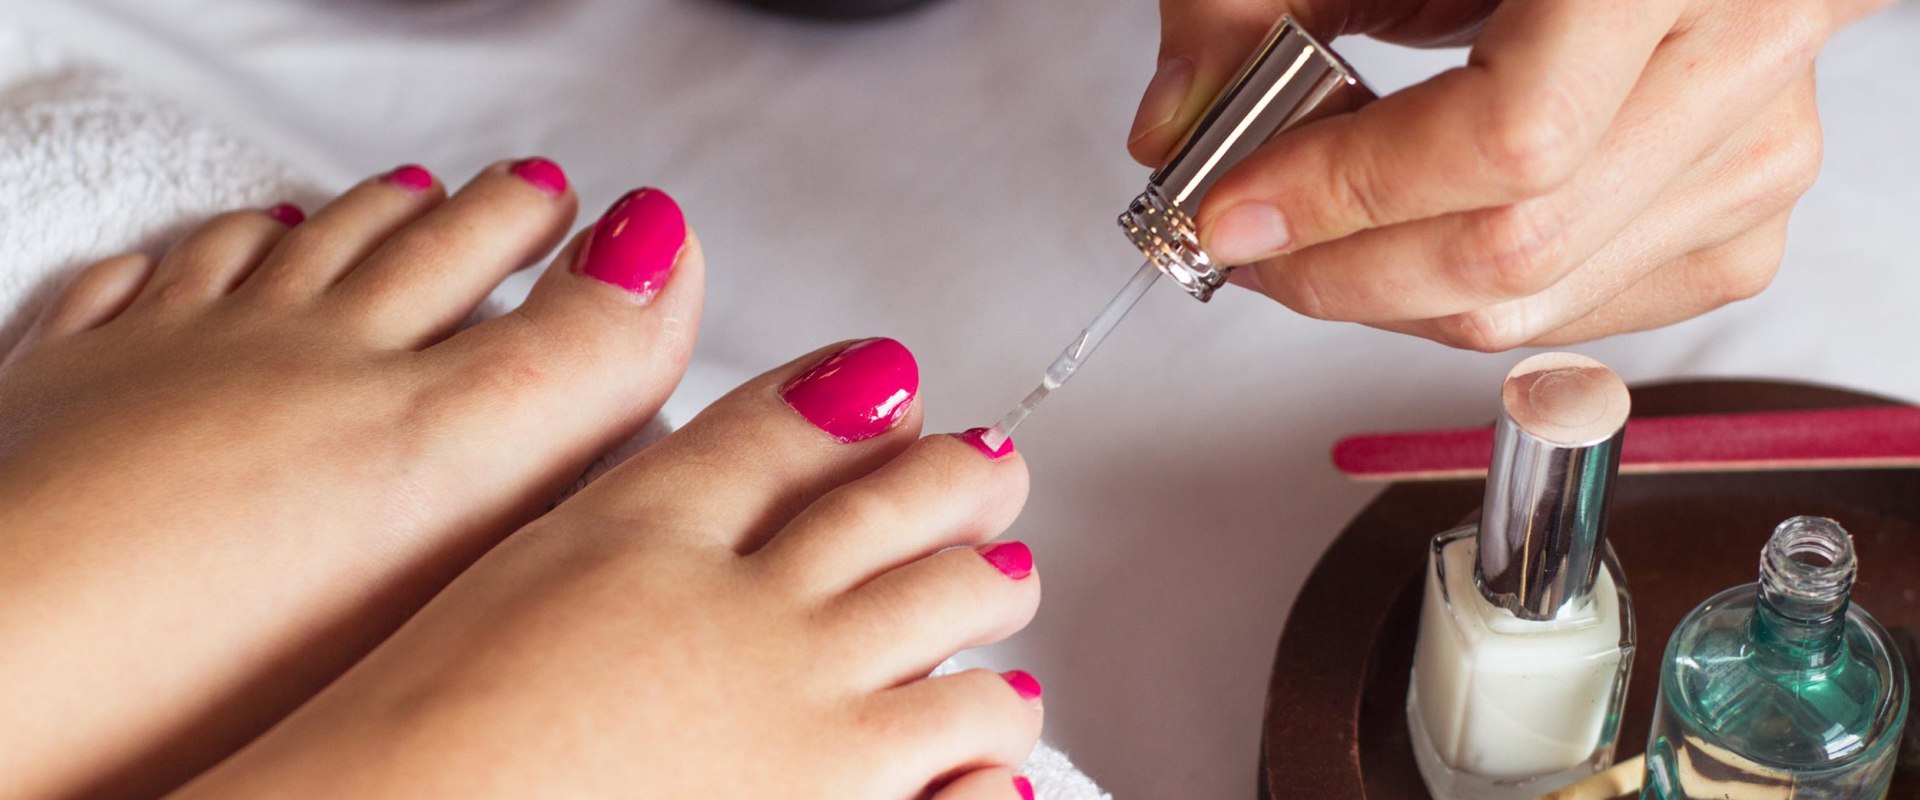 The Best Manicure and Pedicure Services for Beauty and Wellness in London